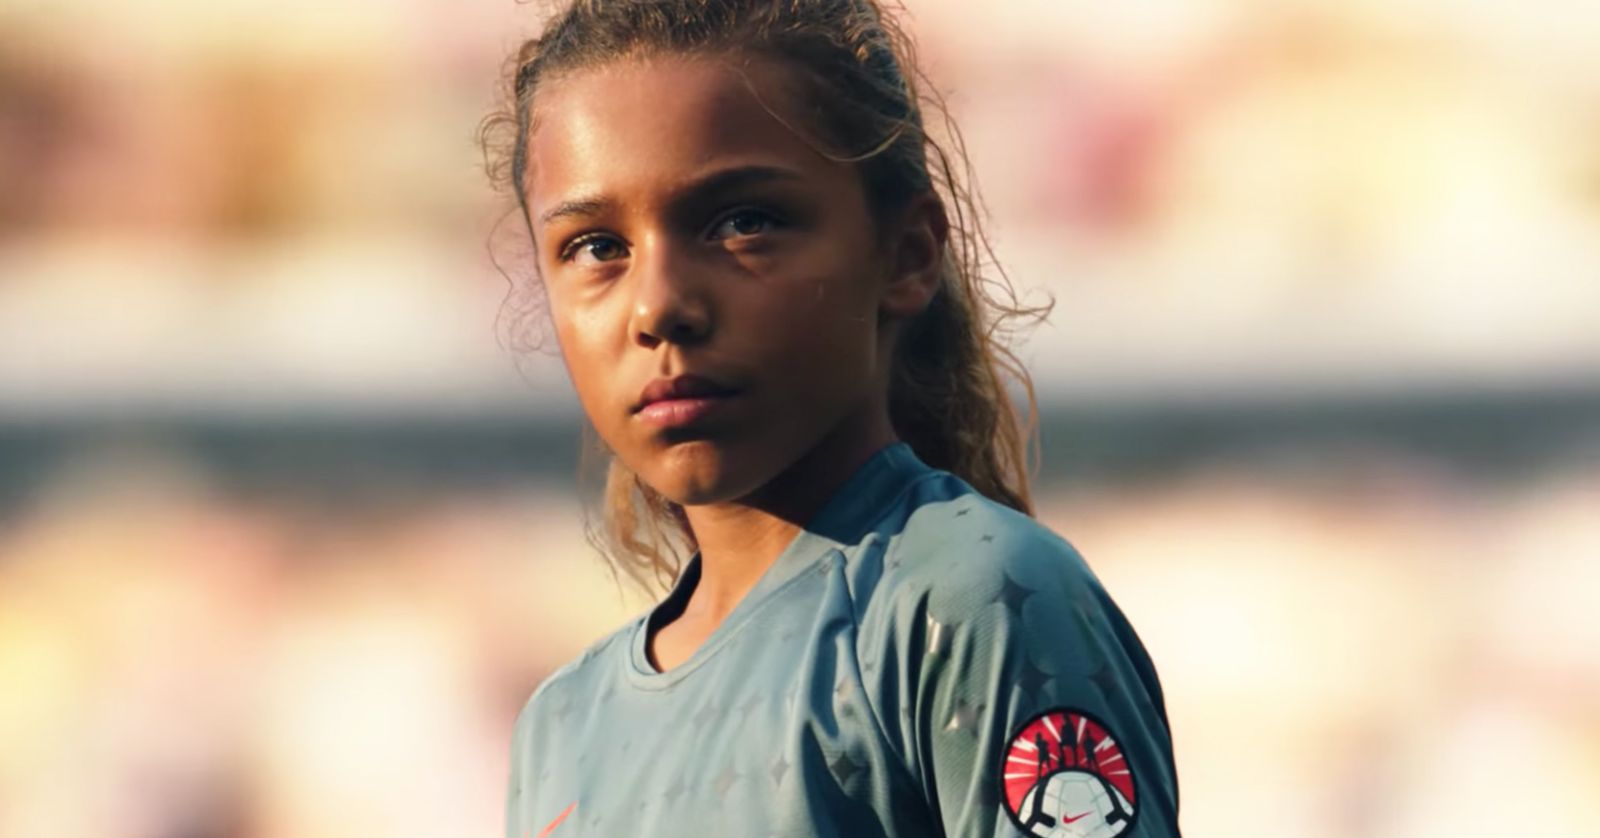 women's world cup nike commercial